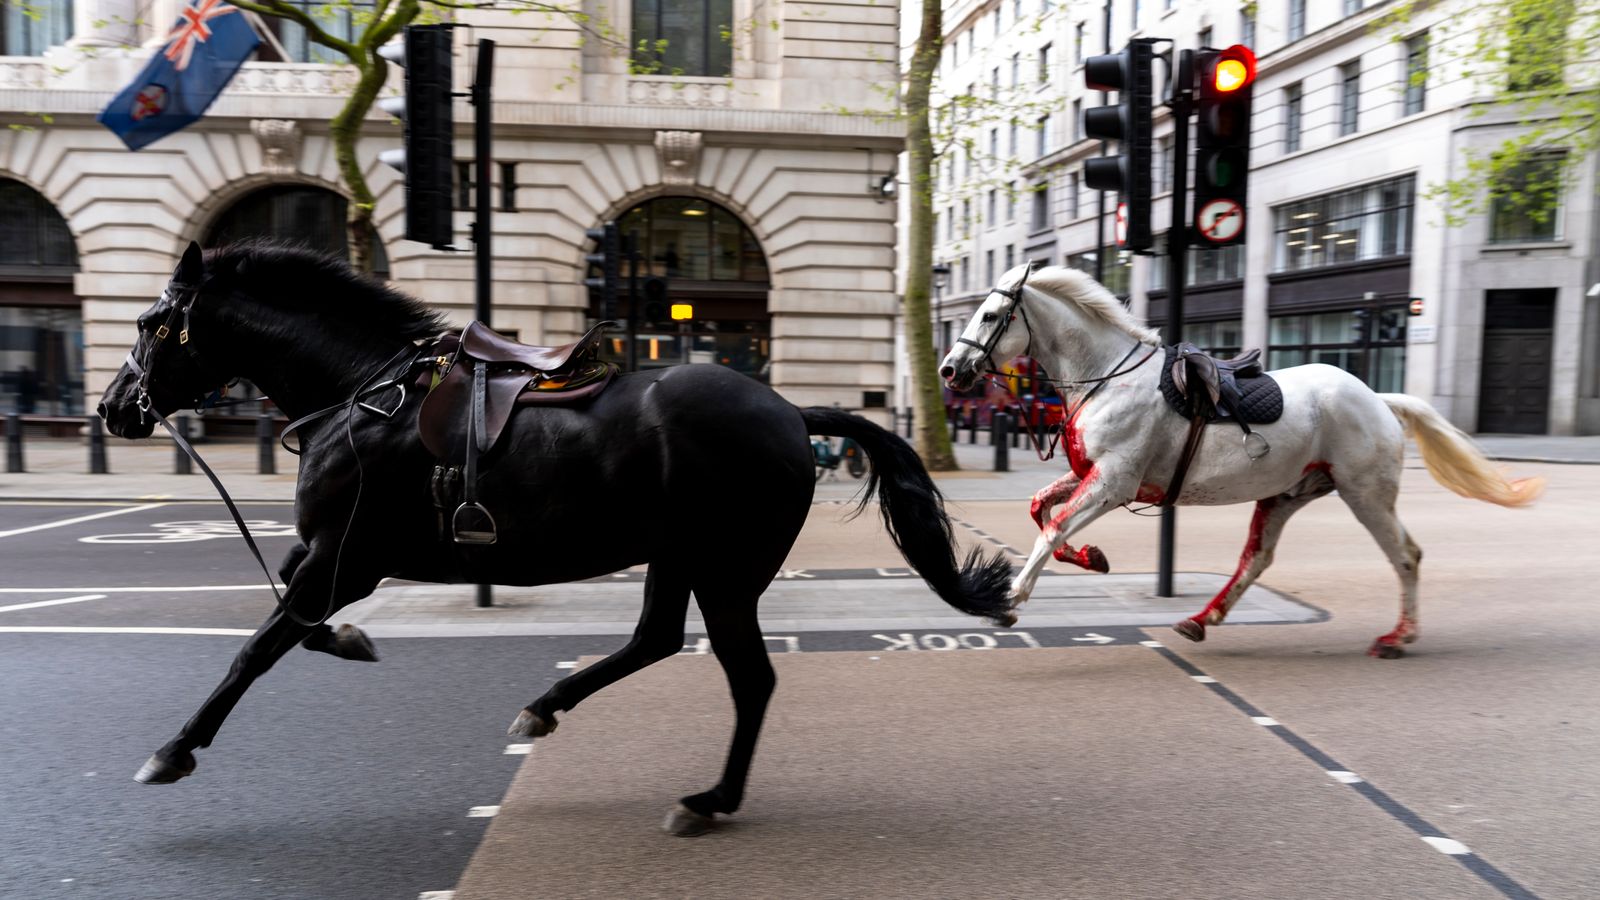 Army provides update on horses that were injured bolting through London | UK News